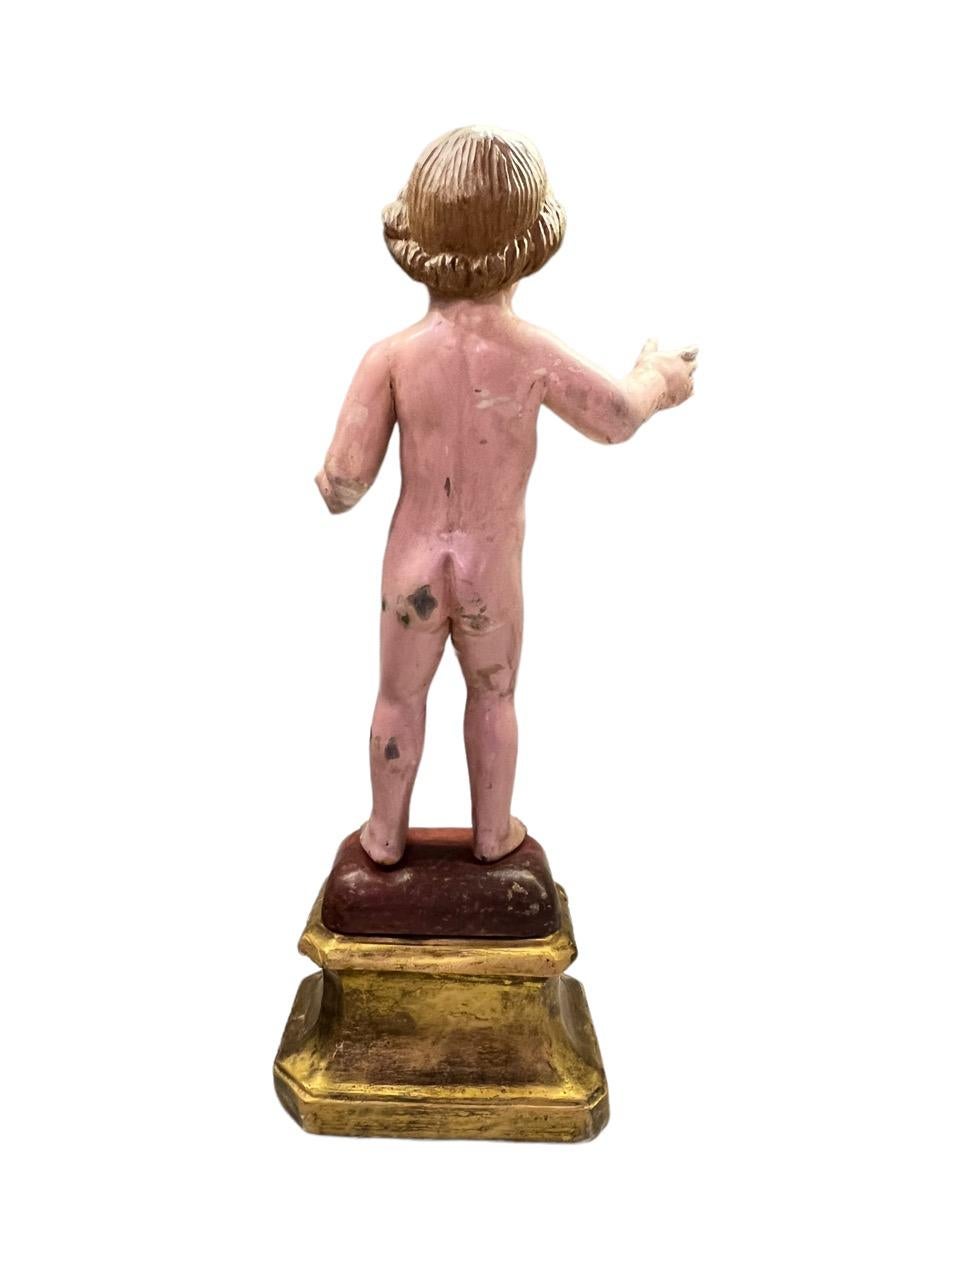 18th Century Italian Carved Wood and Polychromed Figure Depicting Baby Jesus For Sale 3